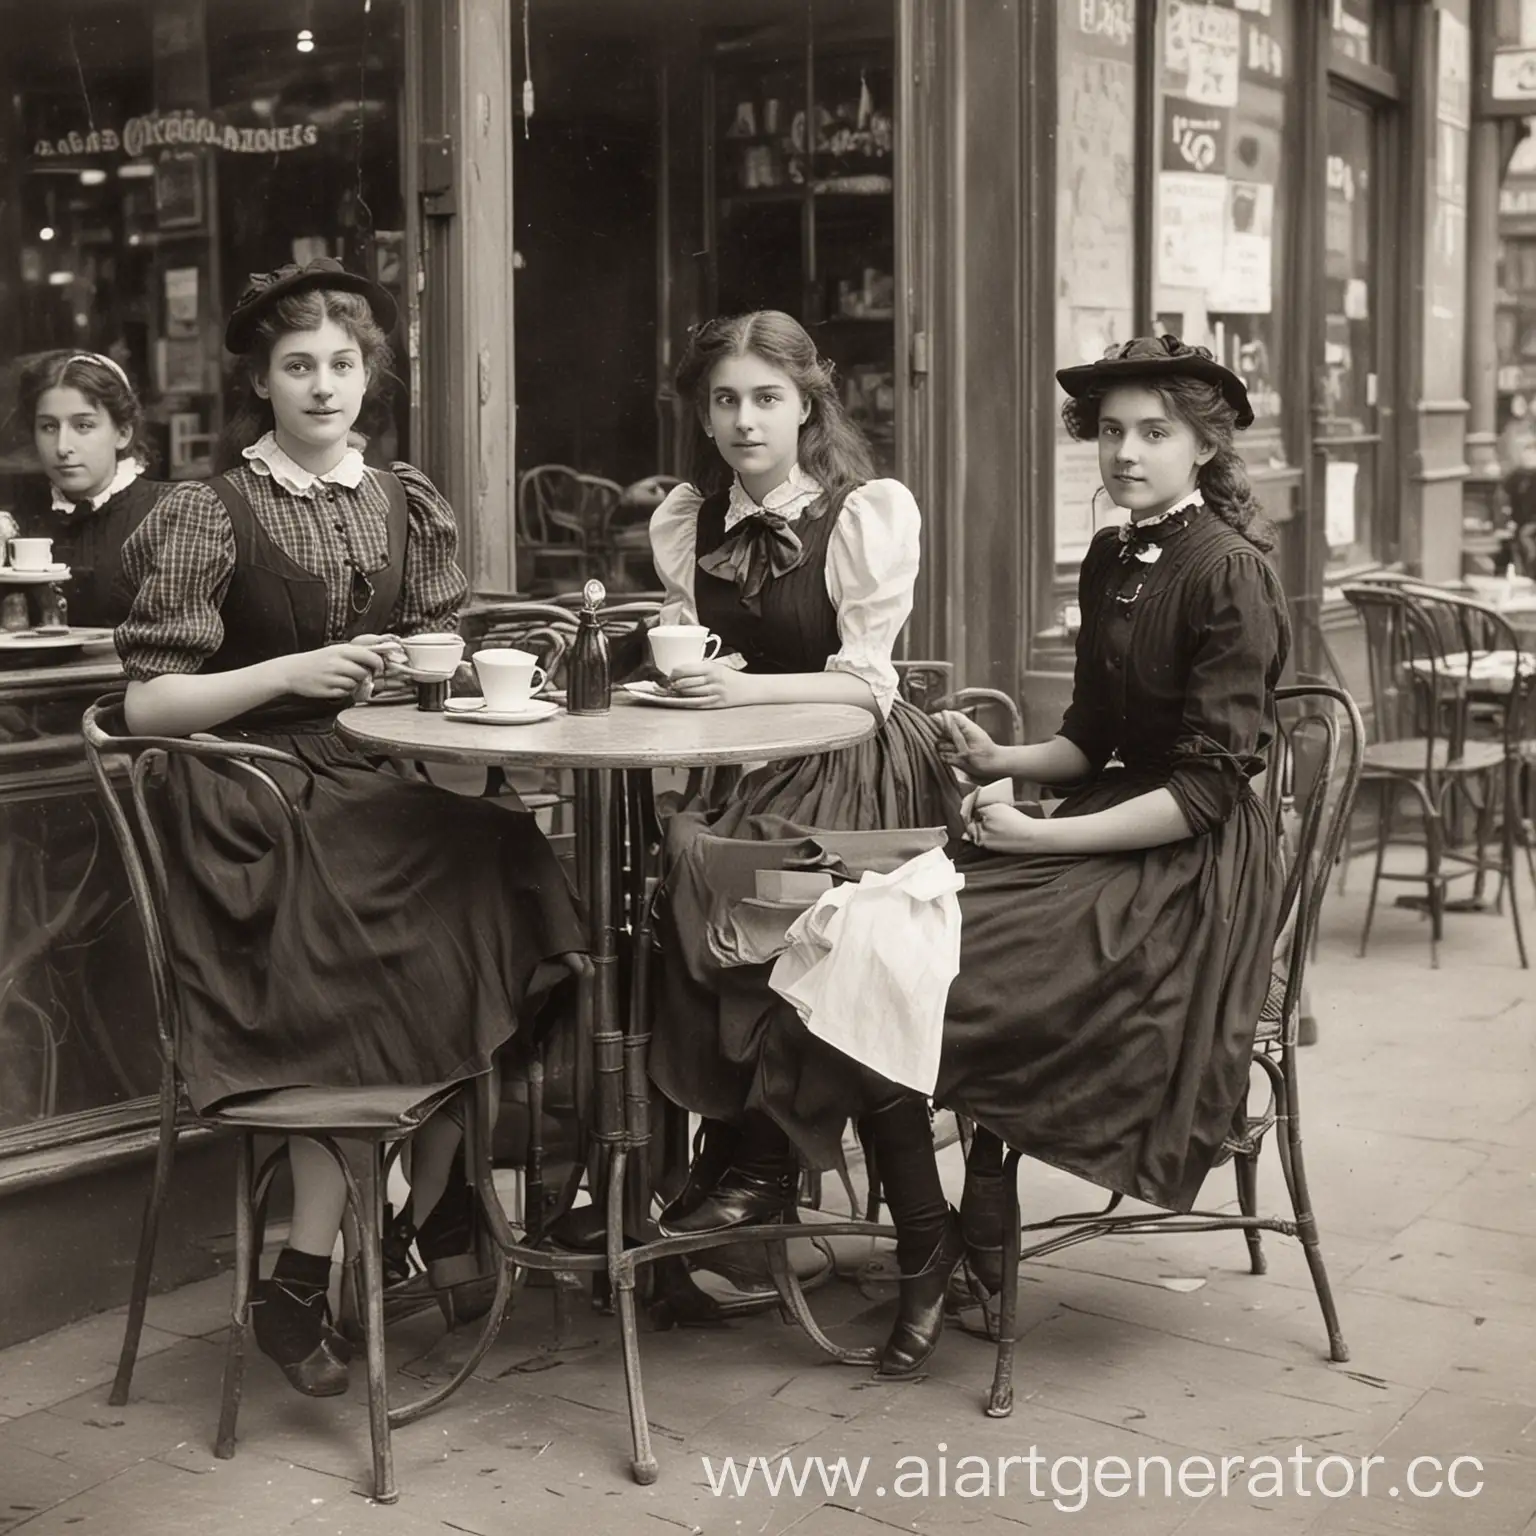 Vintage-Caf-Scene-Two-Elegant-Young-Women-in-1900